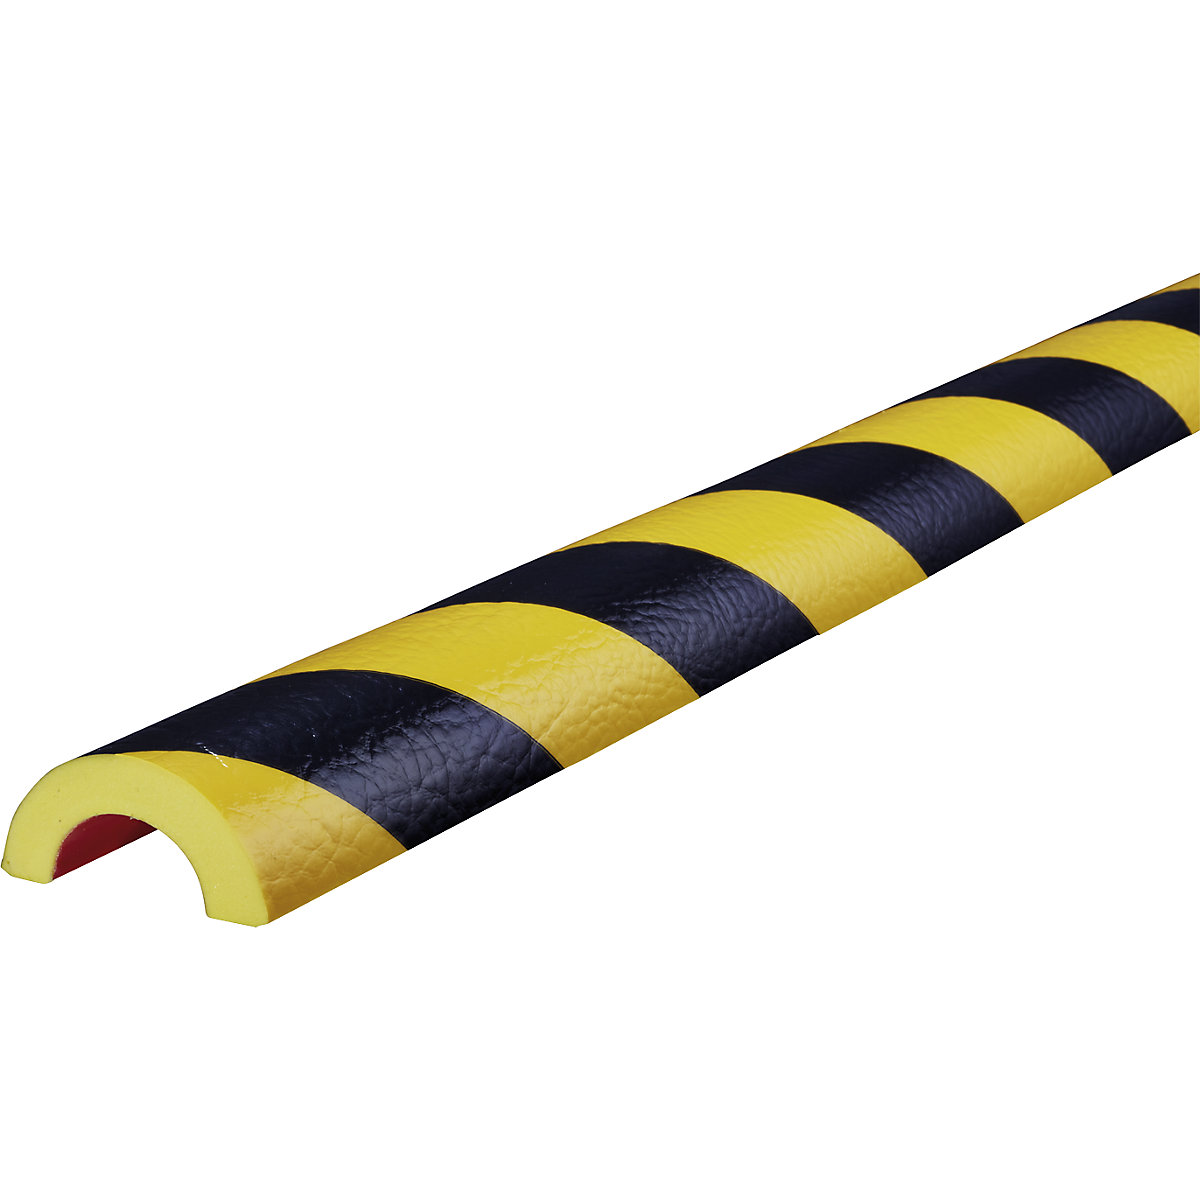 Knuffi® pipe protection – SHG, type R30, 1 x 50 m roll, black / yellow-12